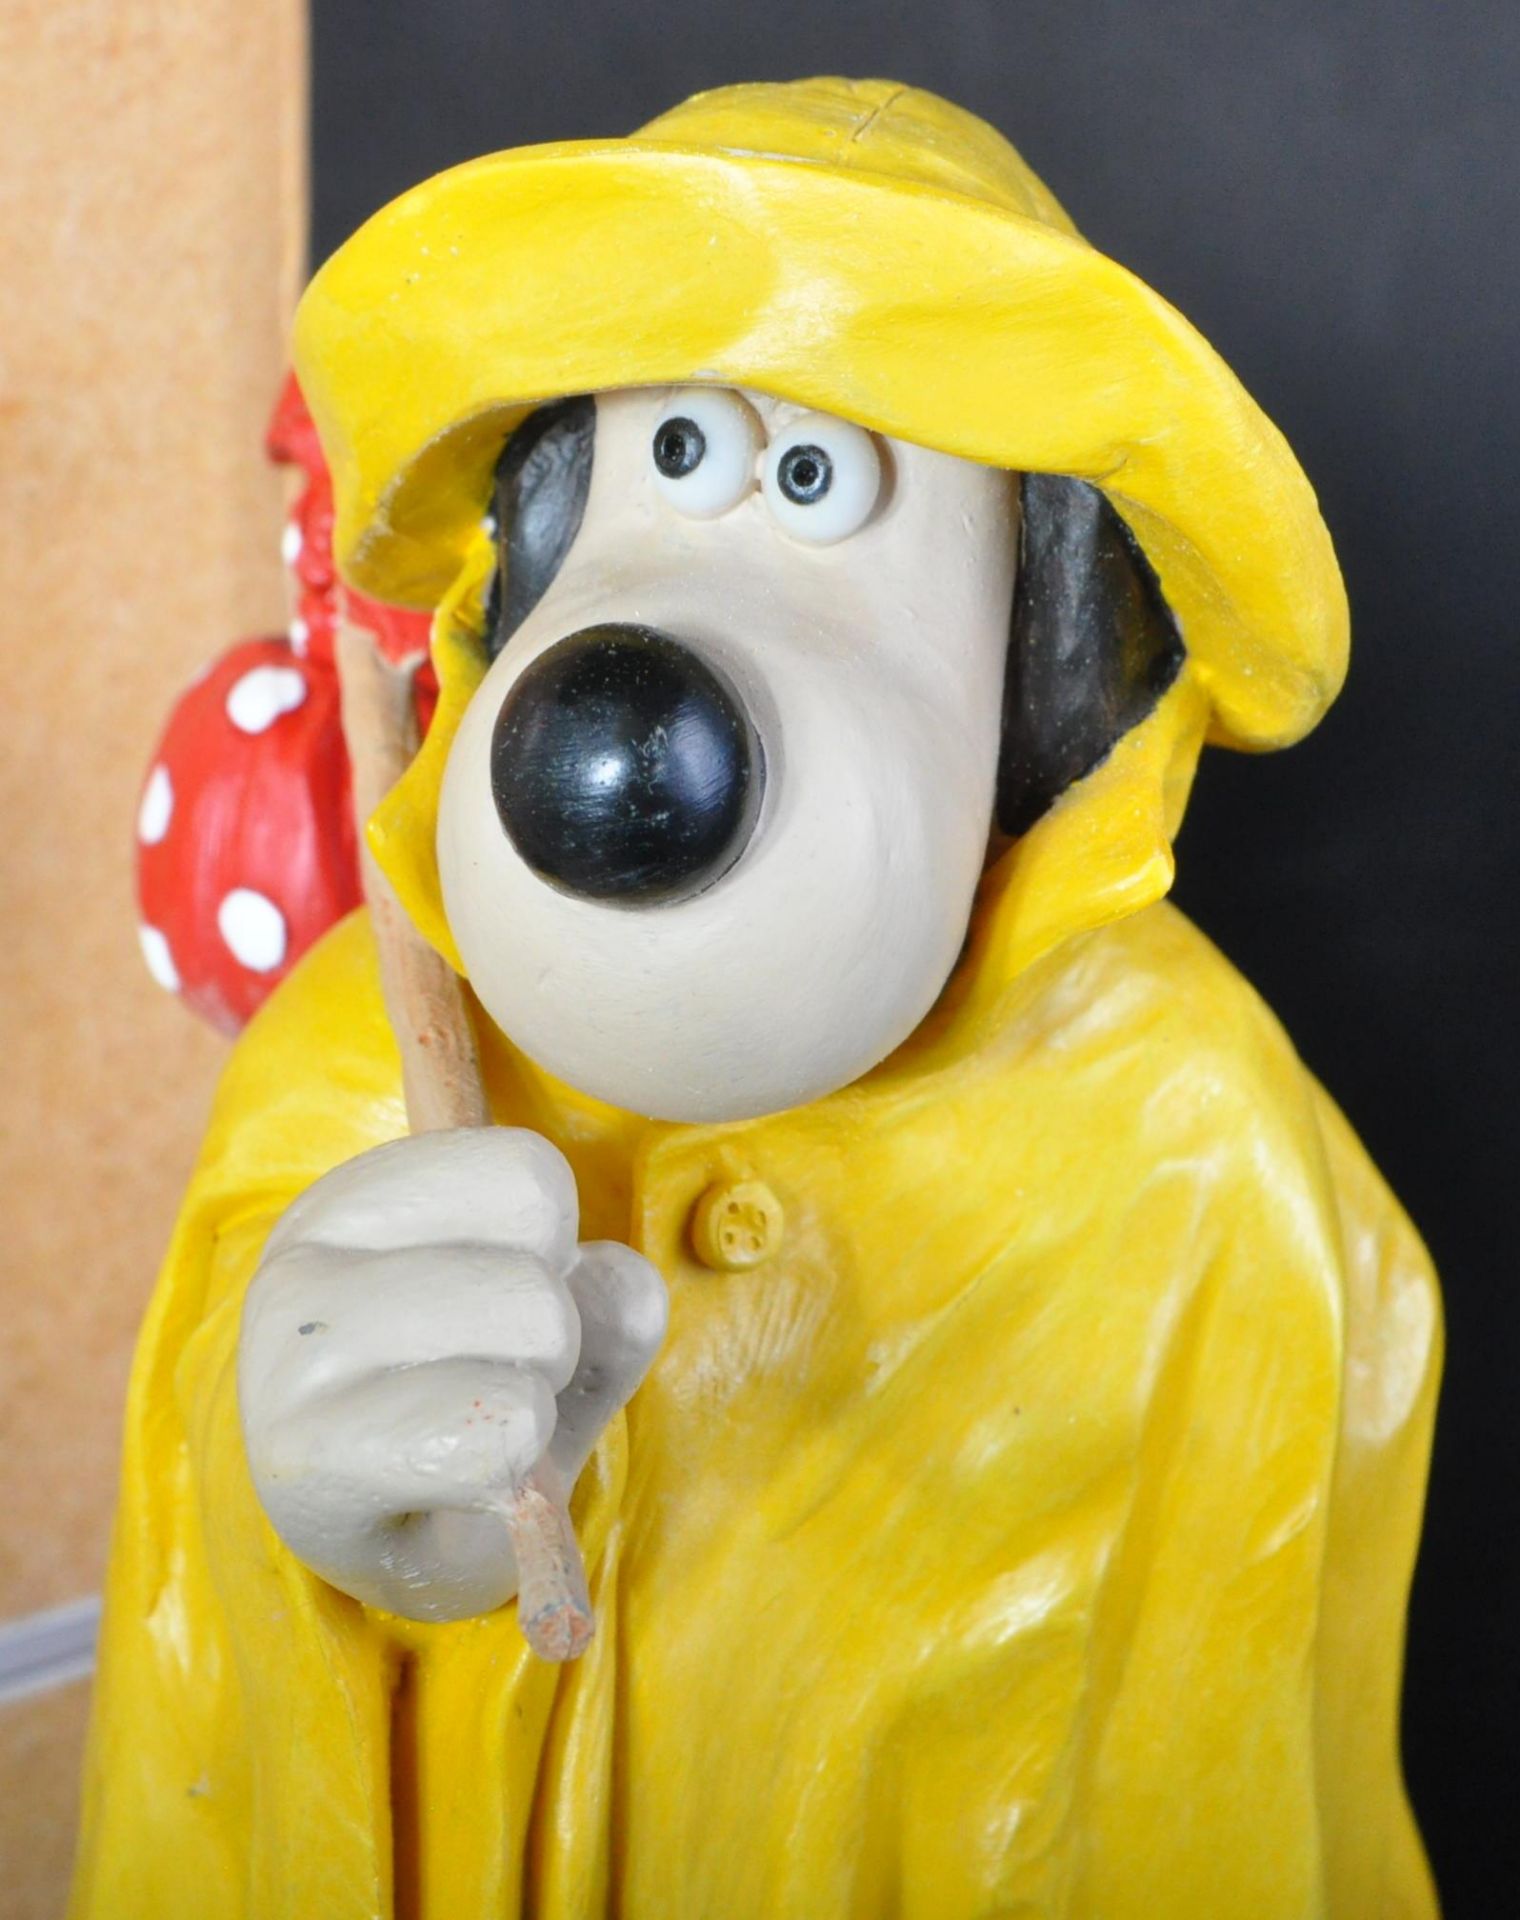 WALLACE & GROMIT - ROBERT HARROP - LIMITED EDITION FIGURINE - Image 3 of 6